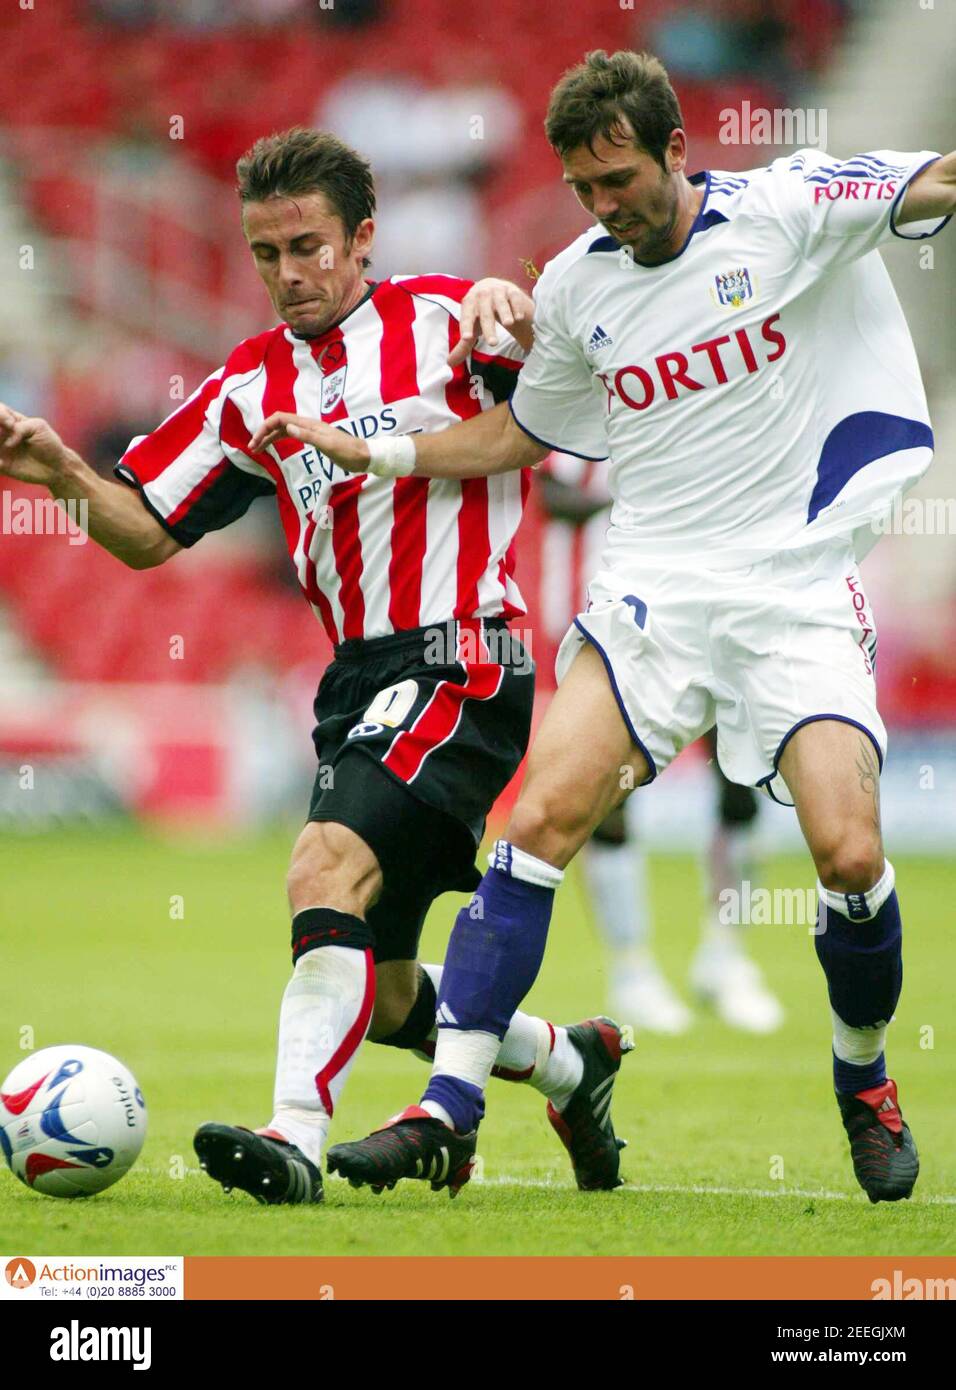 Football - Southampton v RSC Anderlecht Pre Season Friendly - St Mary's  Stadium - 30/7/05 Fabrice Ehret of Anderlecht and David Prutton of  Southampton Mandatory Credit: Action Images / David Field Livepic Stock  Photo - Alamy